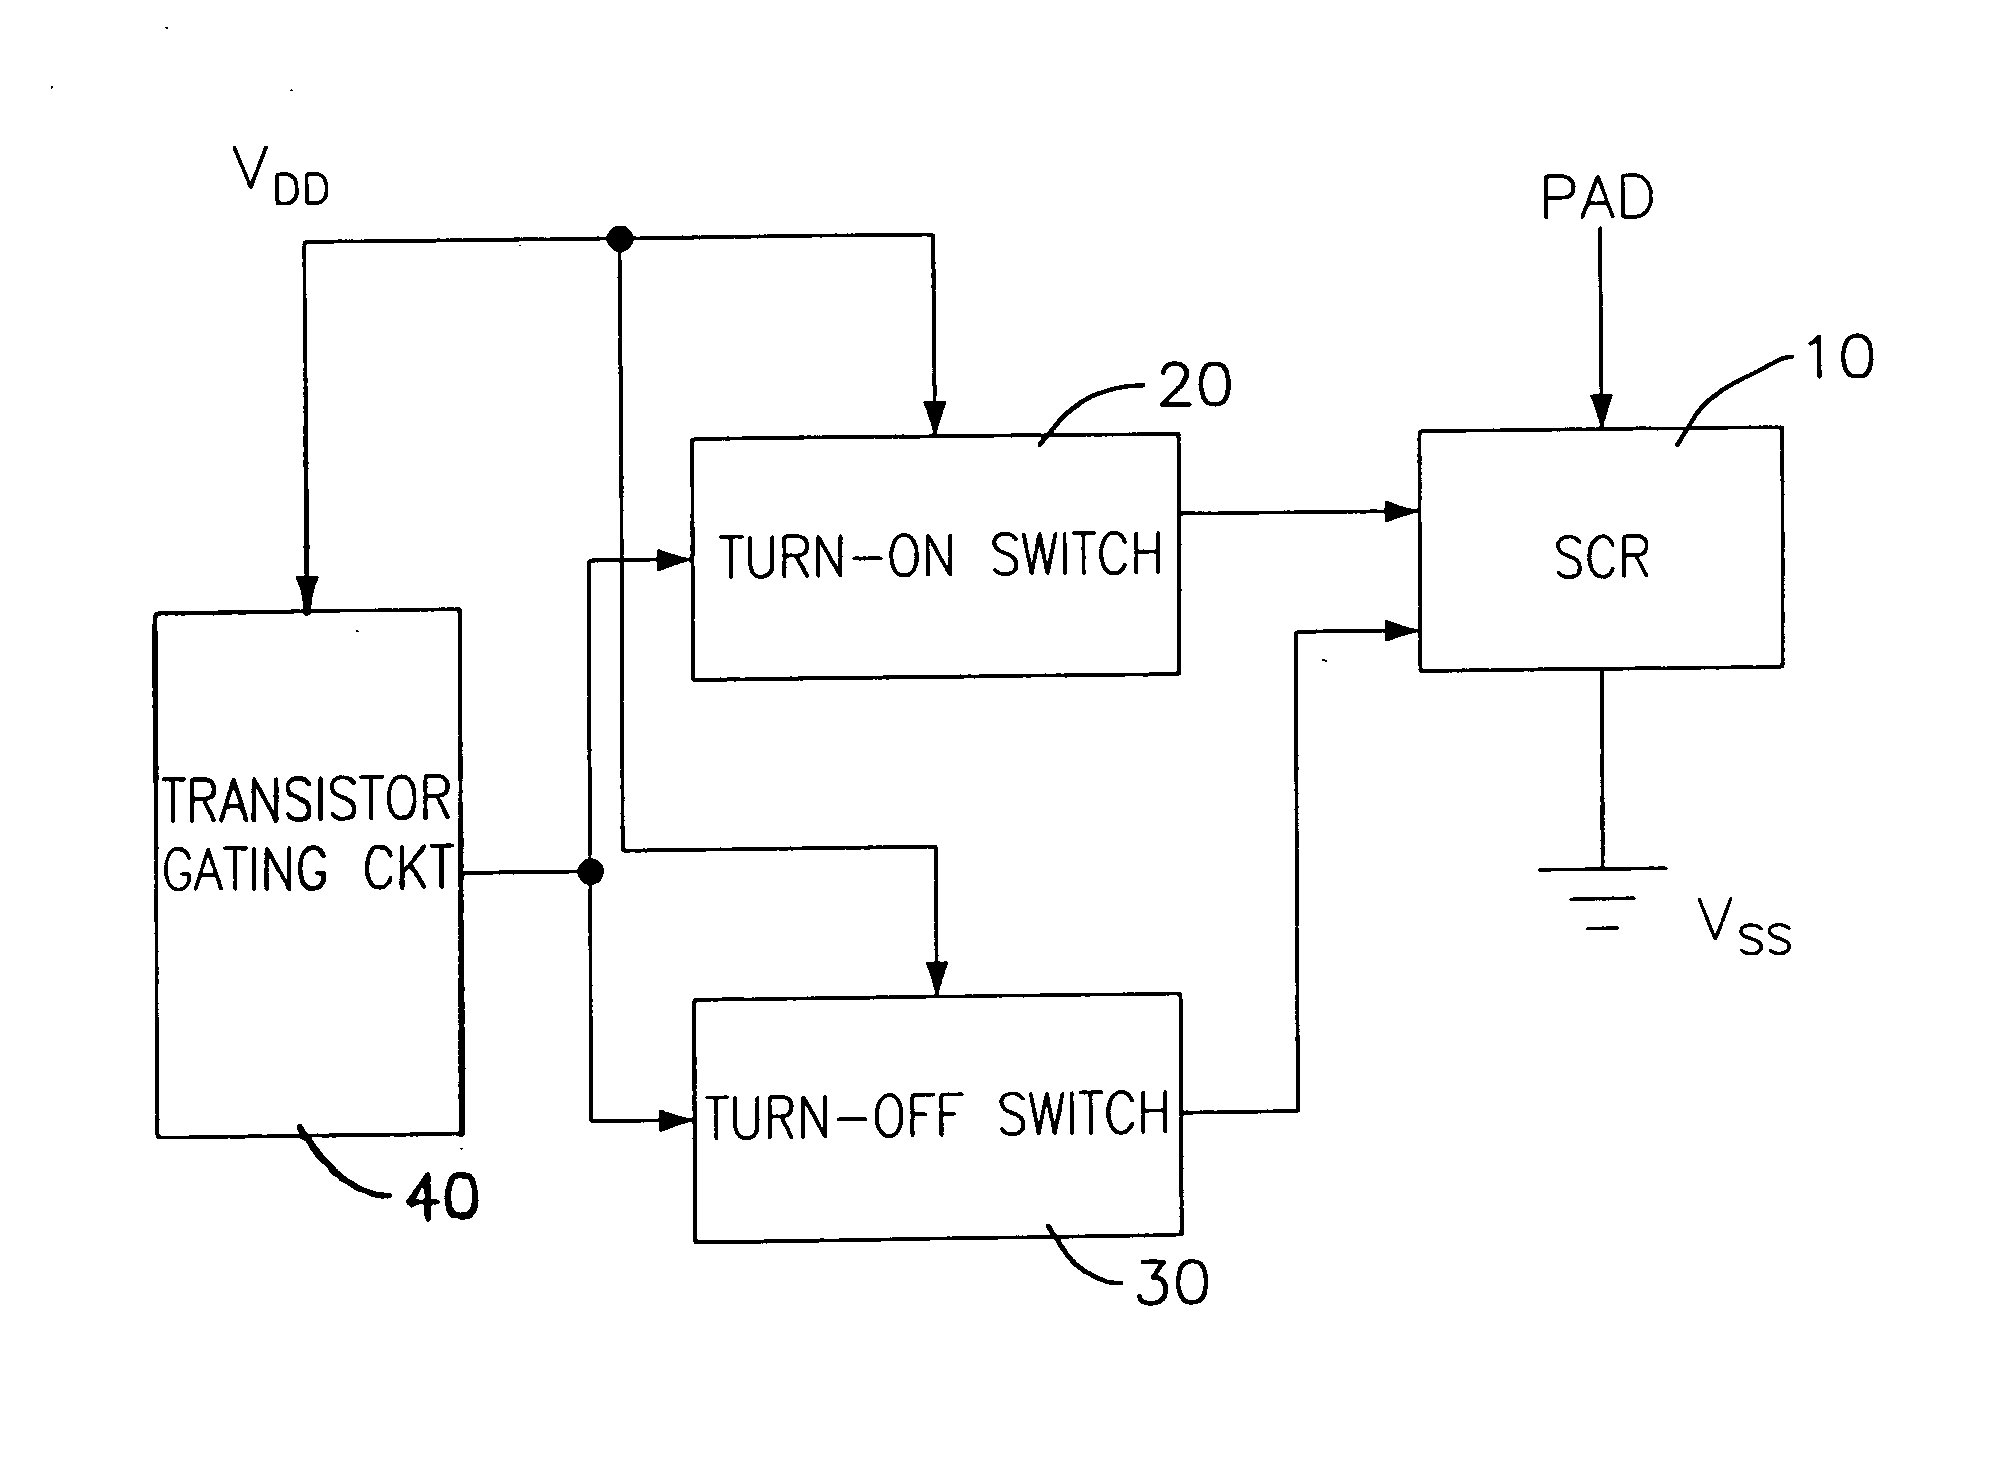 Latch-up-free ESD protection circuit using SCR